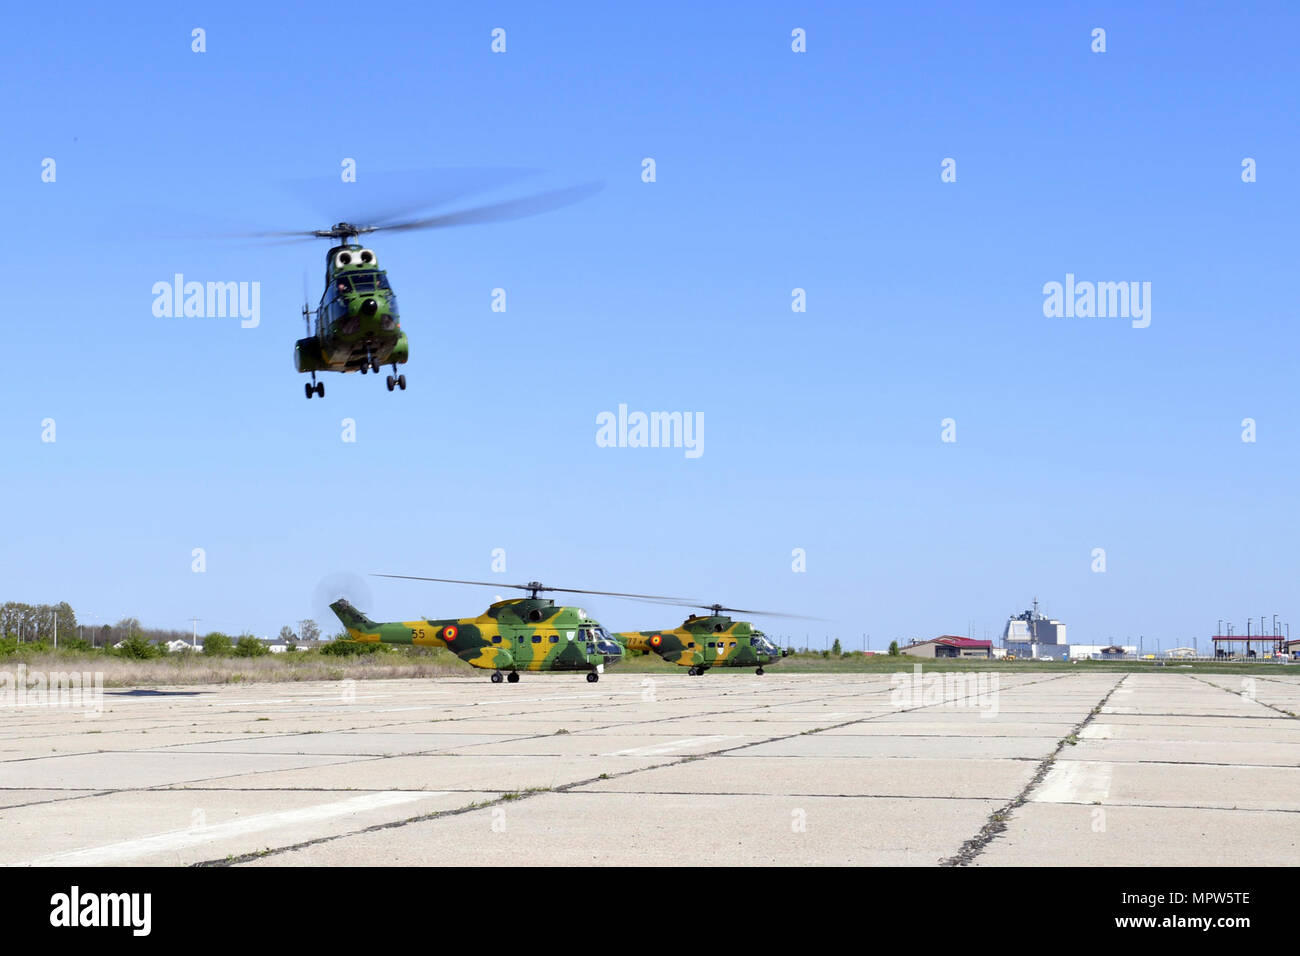 SUPPORT FACILITY DEVESELU, Romania (April 11, 2017) Three IAR-330 Puma medium transport helipcopters take off from Naval Support Facility Deveselu carrying Commander, U.S. Air Forces in Europe and U.S. Air Forces in Africa, Commander, Allied Air Command, and Director, Joint Air Power Competency Centre, Kalkar, Germany Gen. Tod D. Wolters, Lt. Gen. Laurian Anastasof, Chief of Romanian Air Force, Brig. Gen. Dieter E. Bareihs, U.S. Air Force Director of Plans, and staff. NSF Deveselu plays a key role in ballistic missile defense in Eastern Europe. The installation's operations enable the responsi Stock Photo